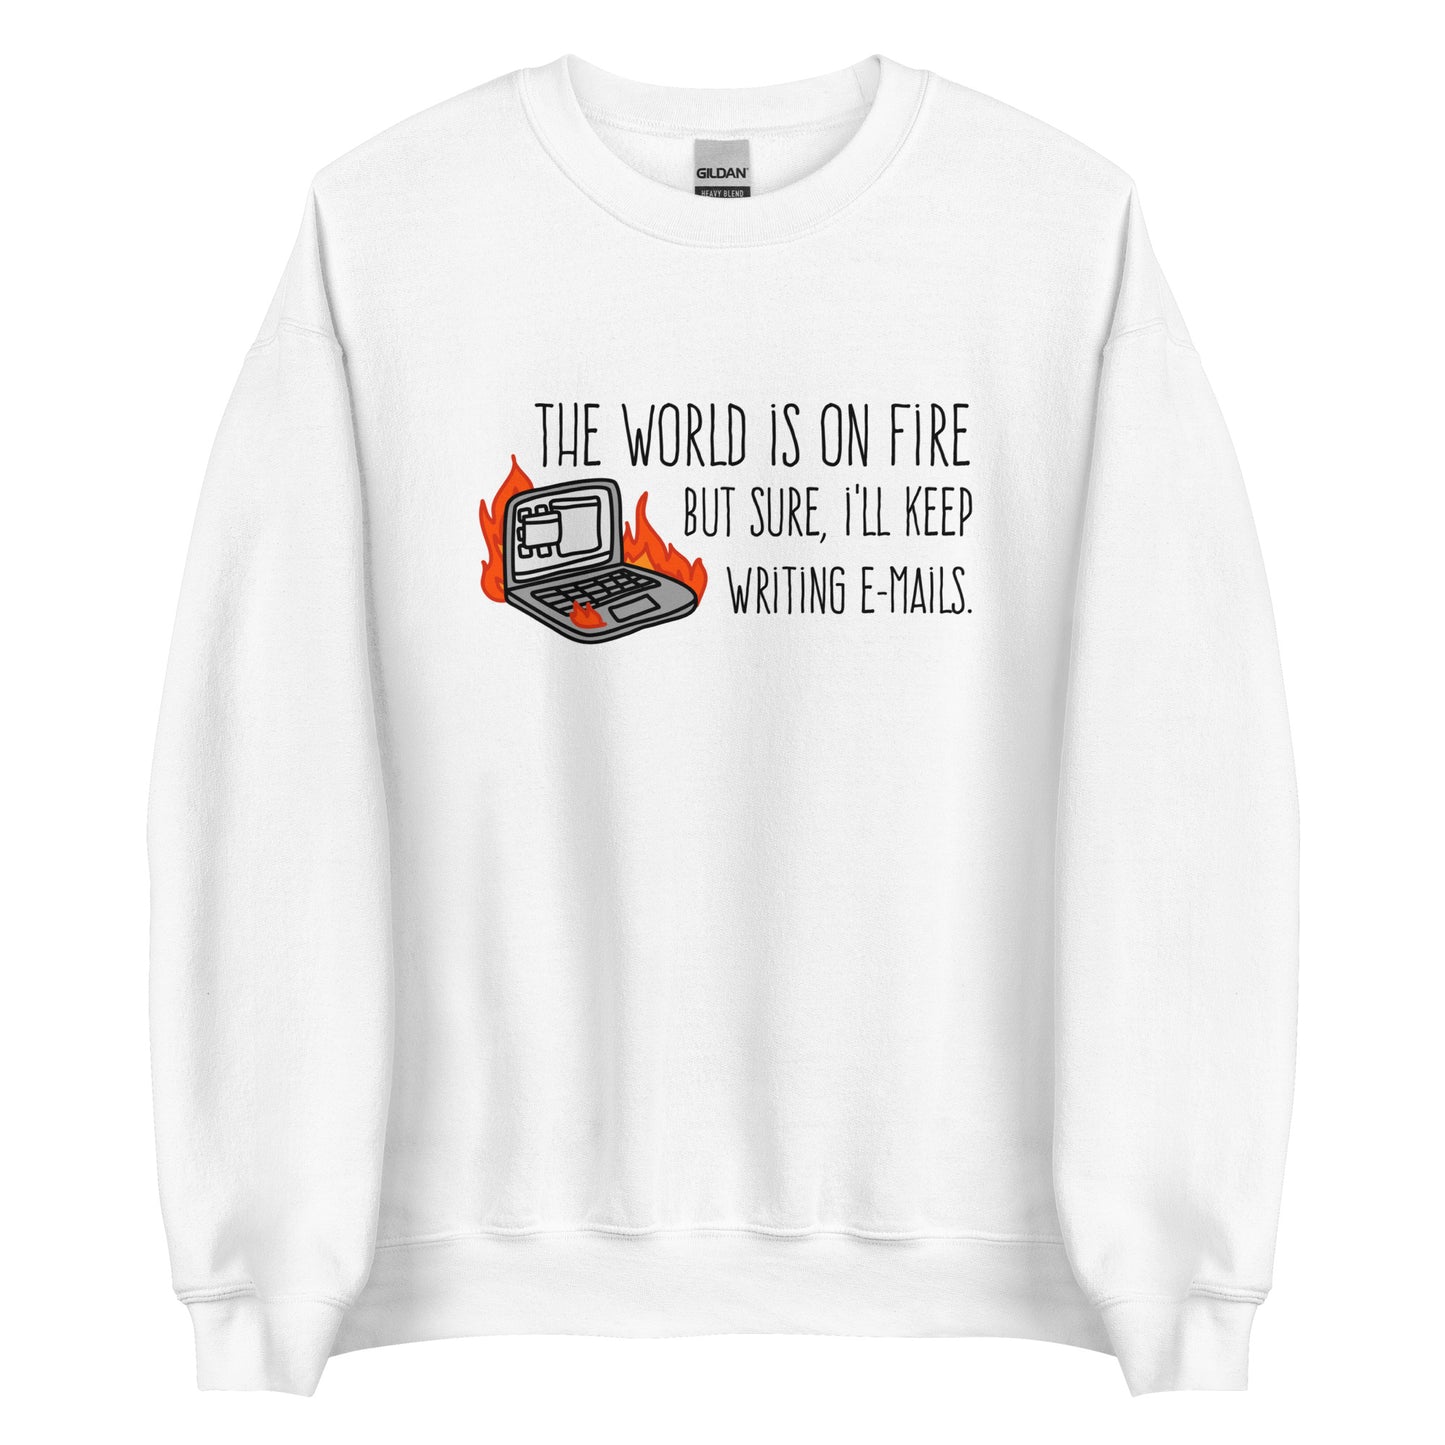 A white crewneck sweatshirt featuring a squiggly illustration of a laptop that is on fire. Text alongside the laptop reads "the world is on fire but sure, I'll keep writing e-mails."